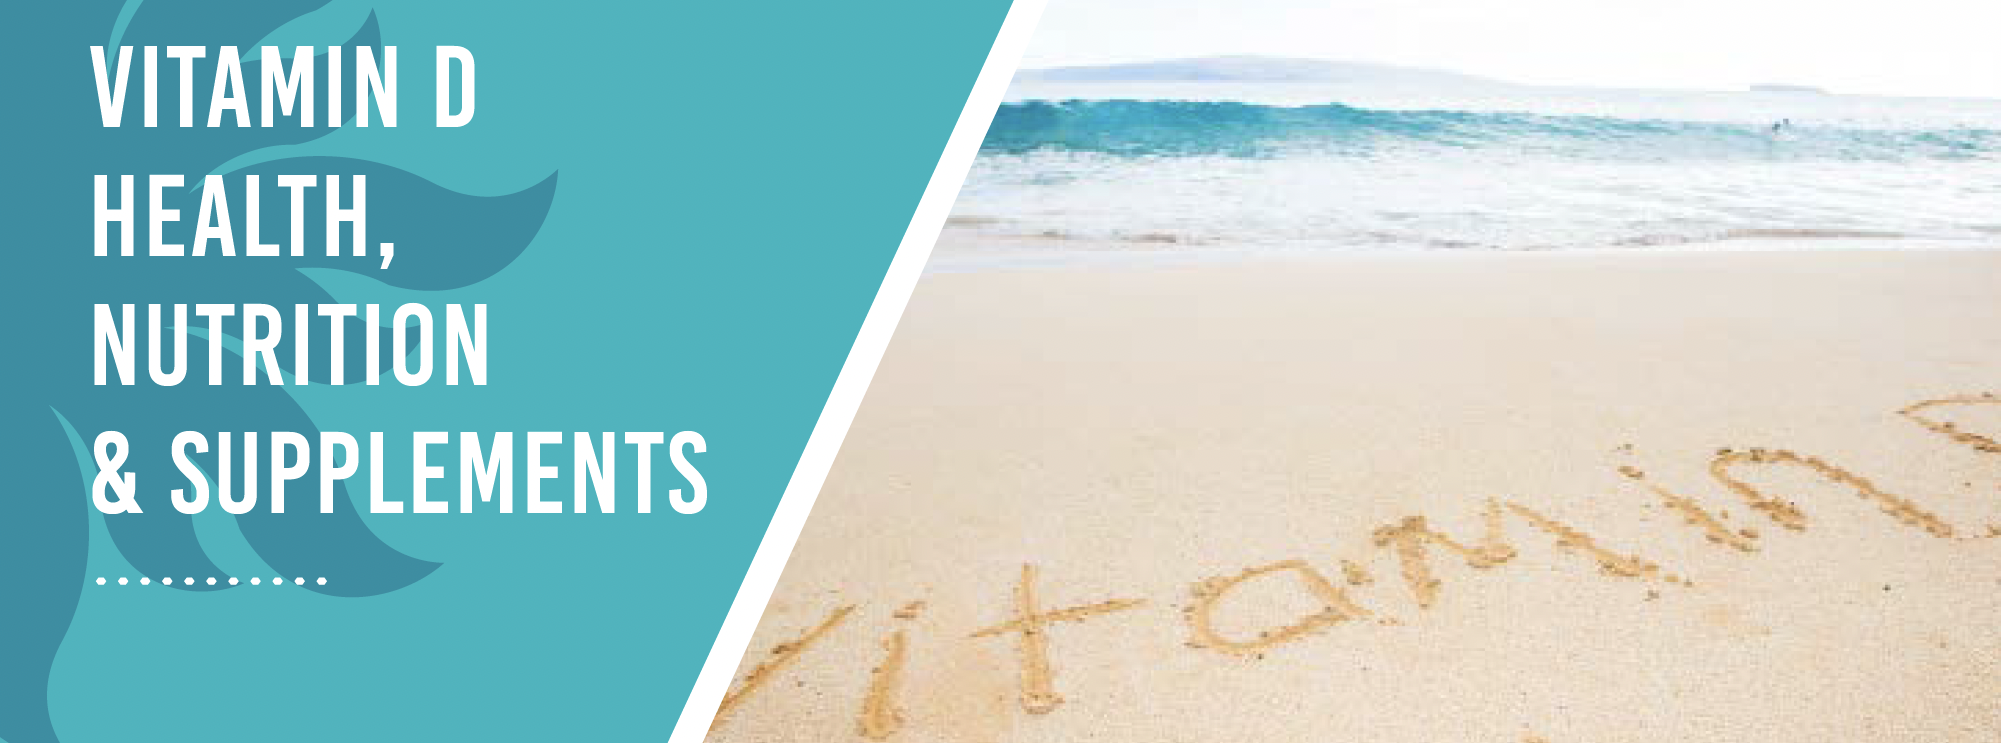 Header with image of sandy beach with "Vitamins" written on the sand. Text says "VITAMIN D HEALTH, NUTRITION & SUPPLEMENTS"